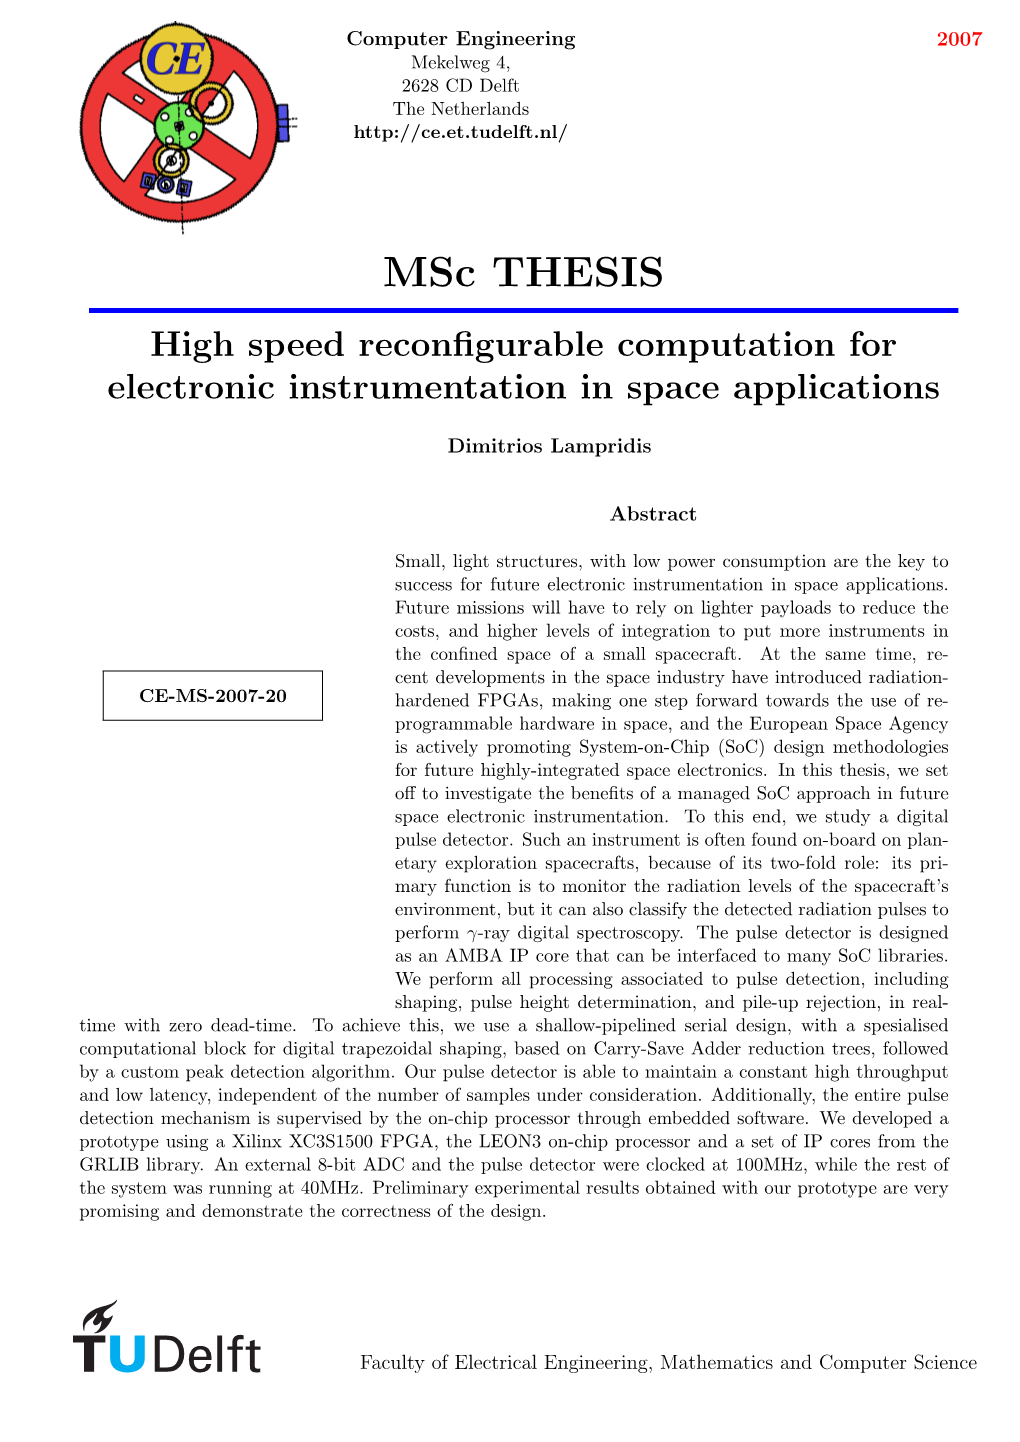 Msc THESIS High Speed Reconﬁgurable Computation for Electronic Instrumentation in Space Applications